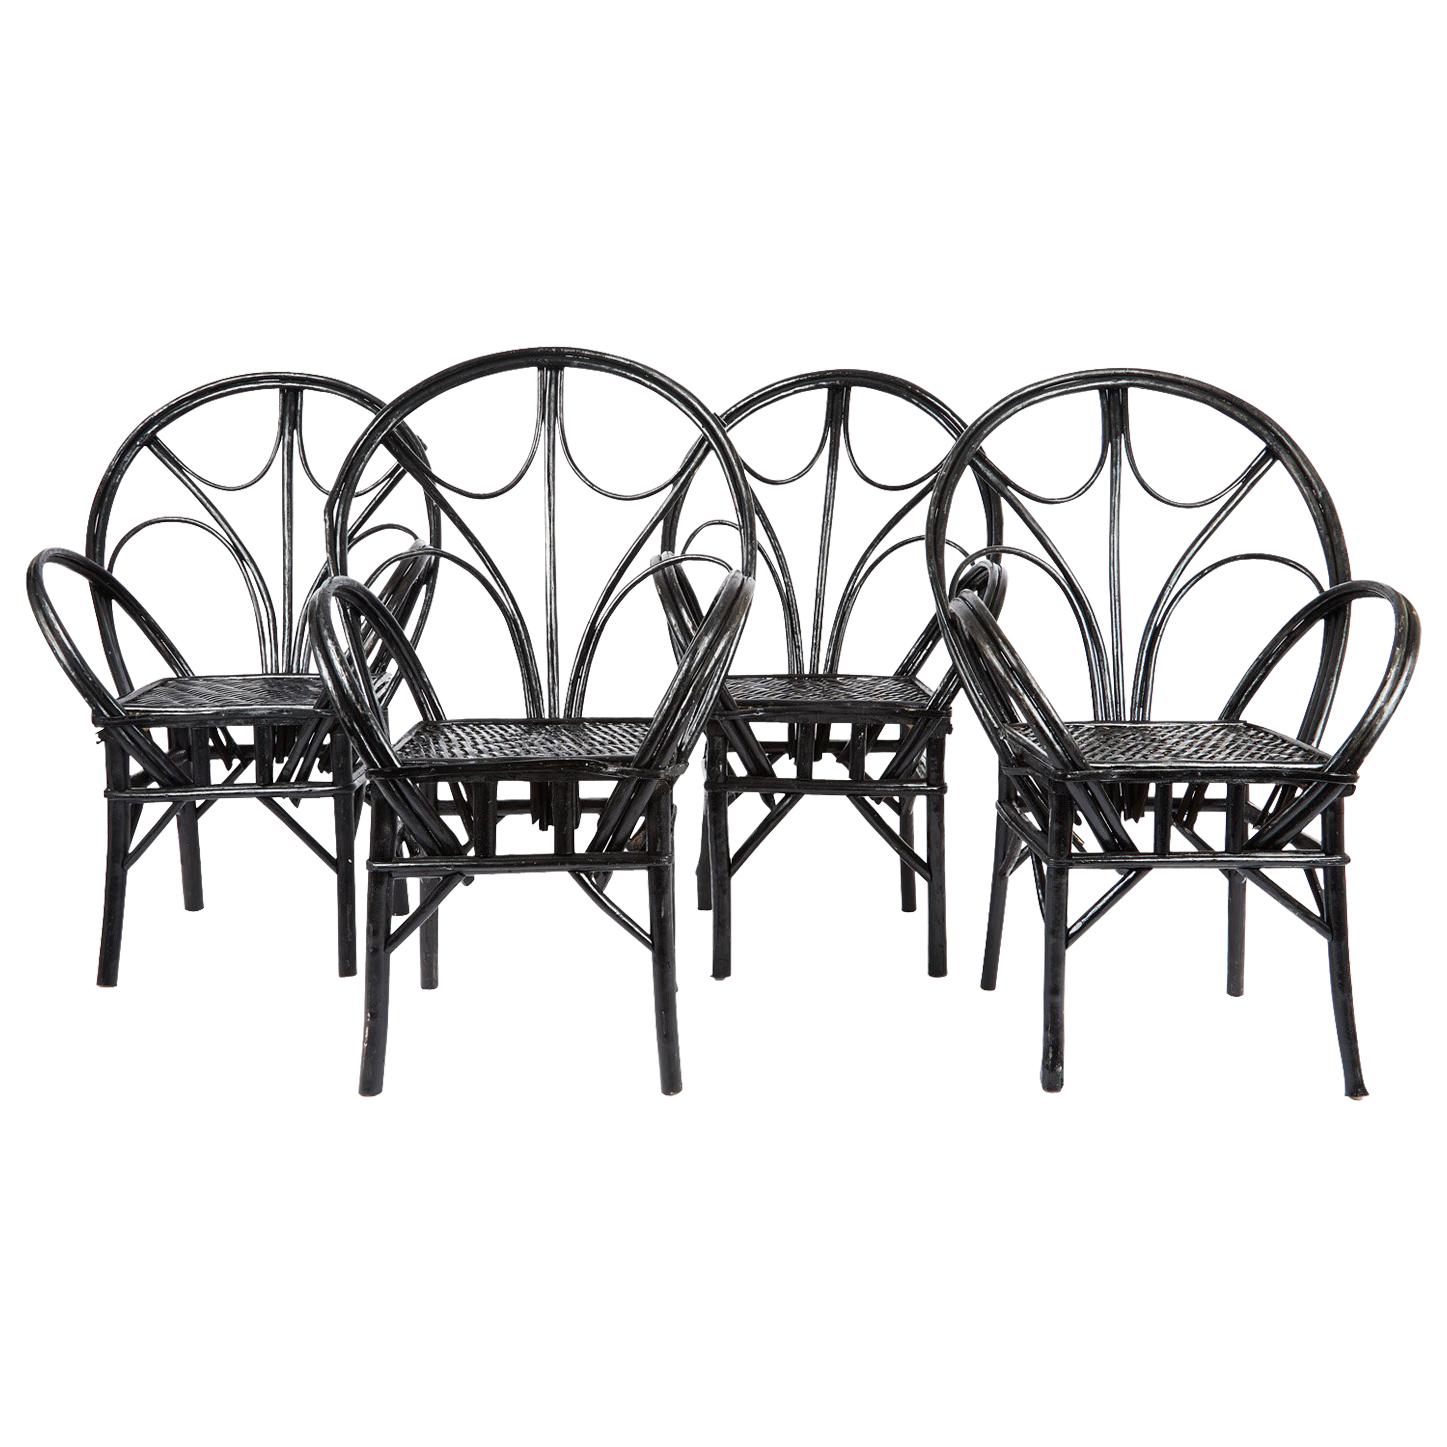 Set of Four Moroccan Wicker Chairs